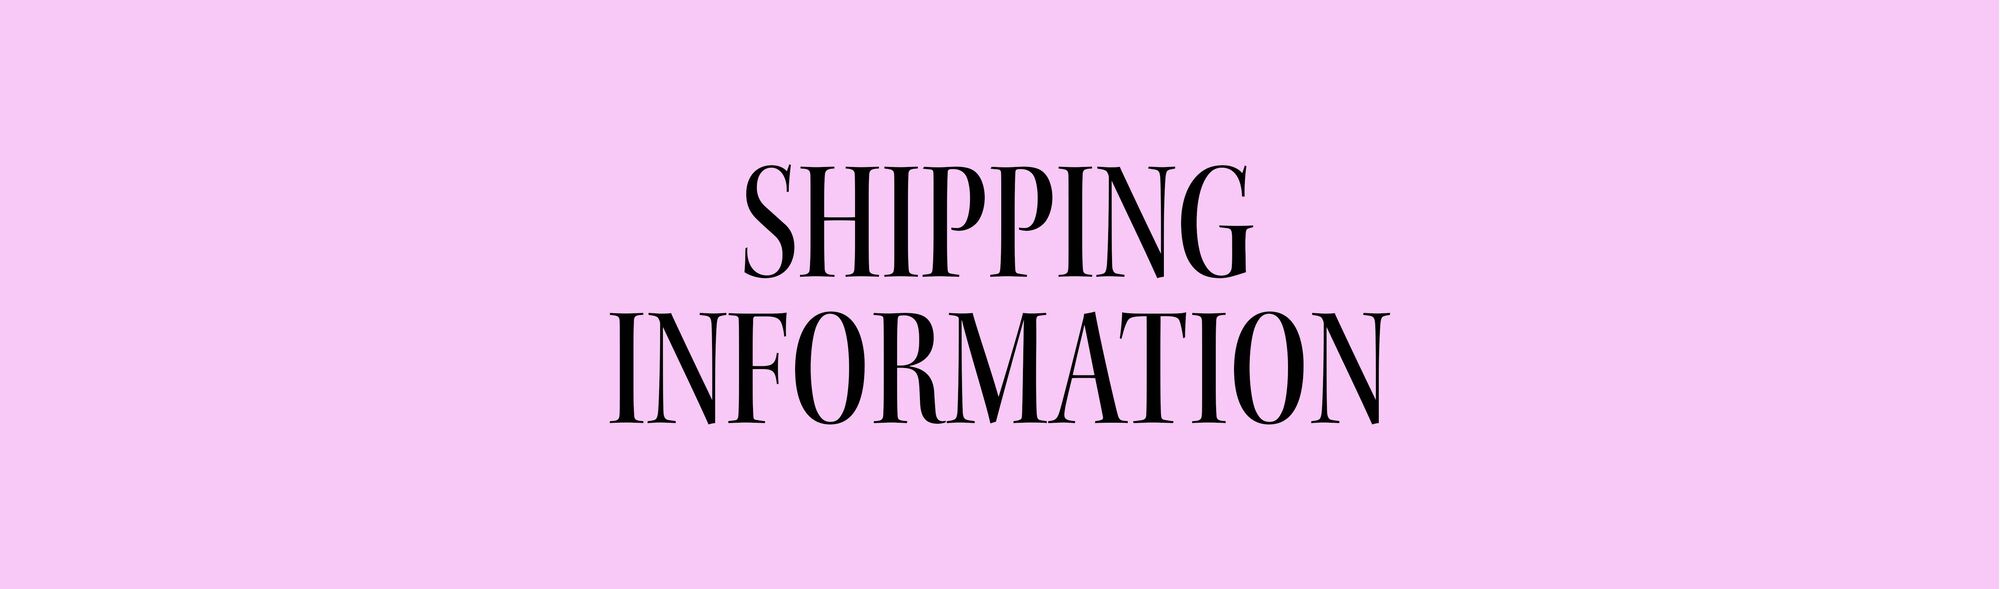 SHIPPING INFORMATION 